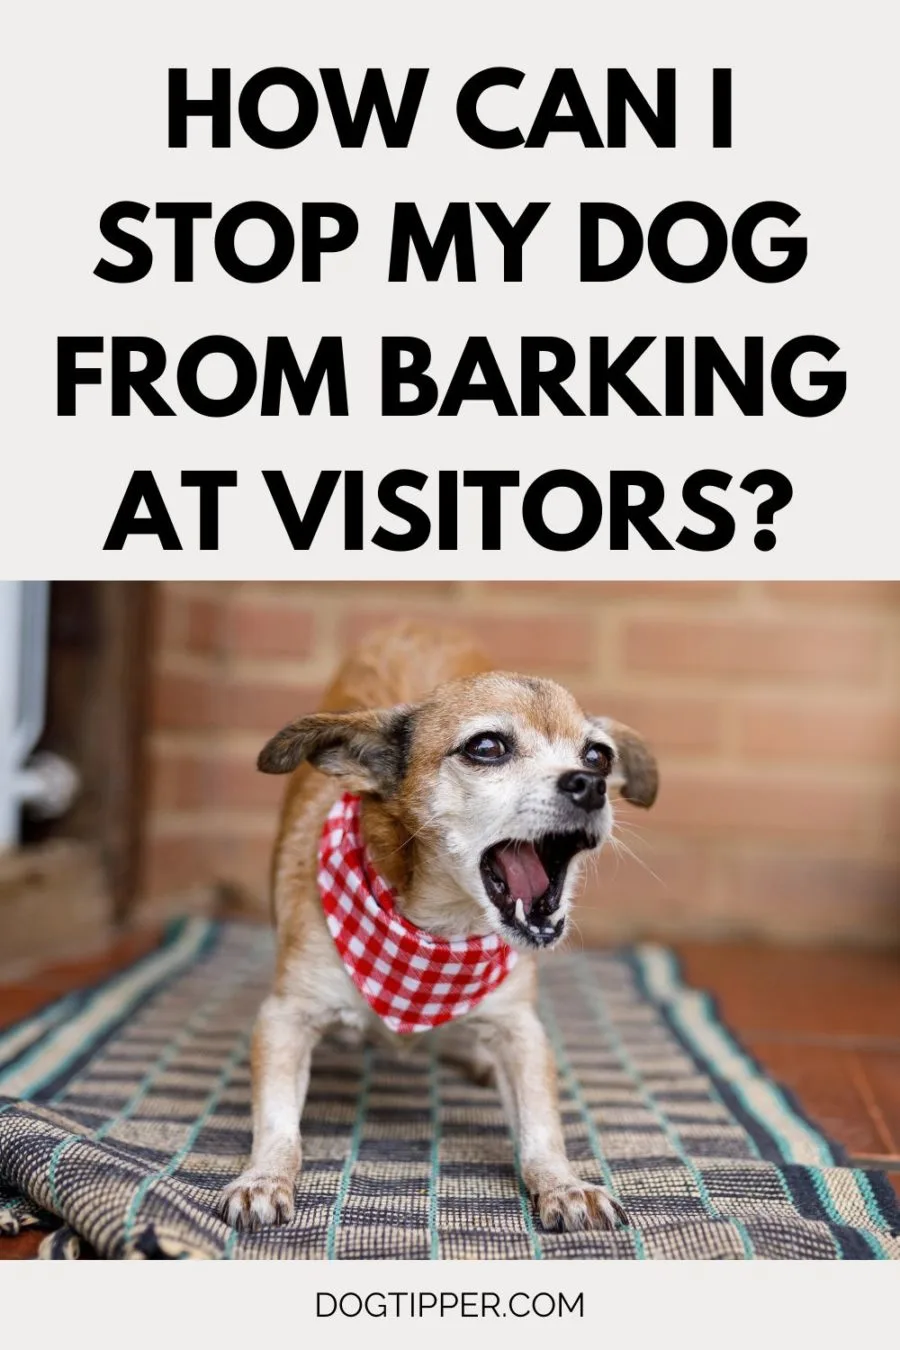 How Can I Stop My Dog From Barking at Visitors?